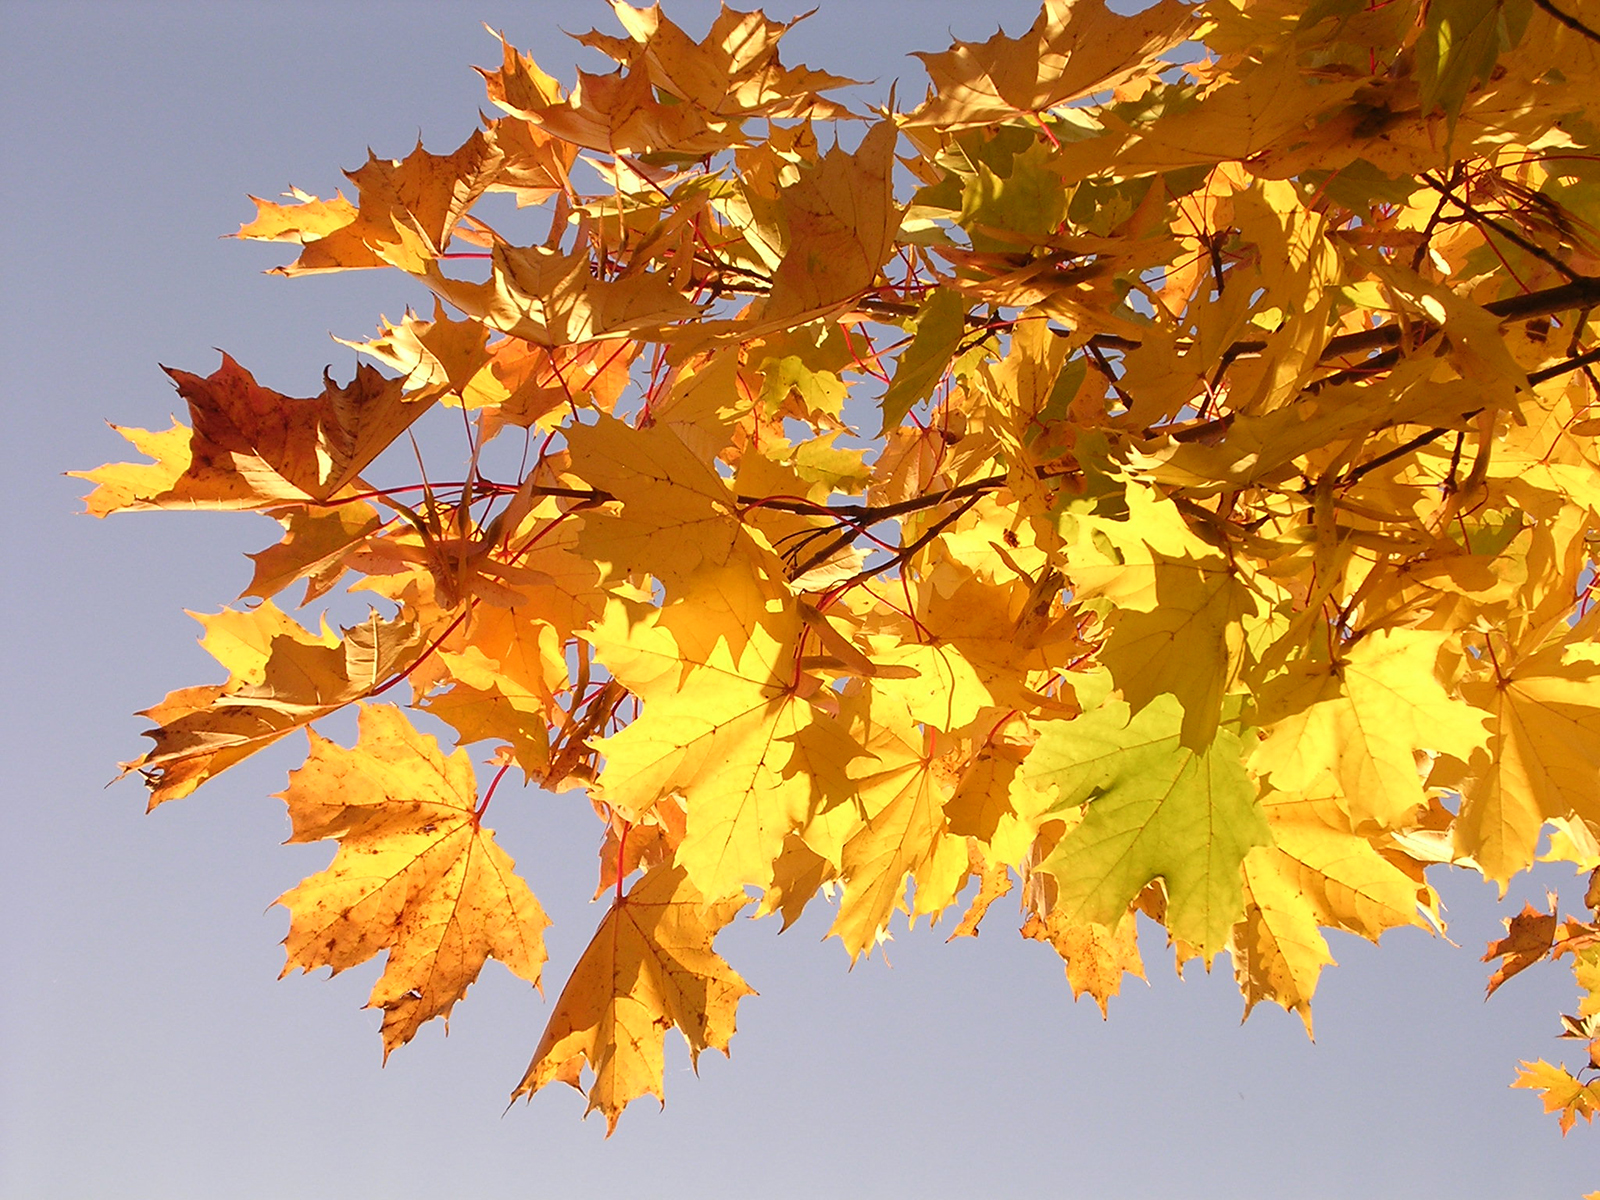 National Tree of Canada - Maple species